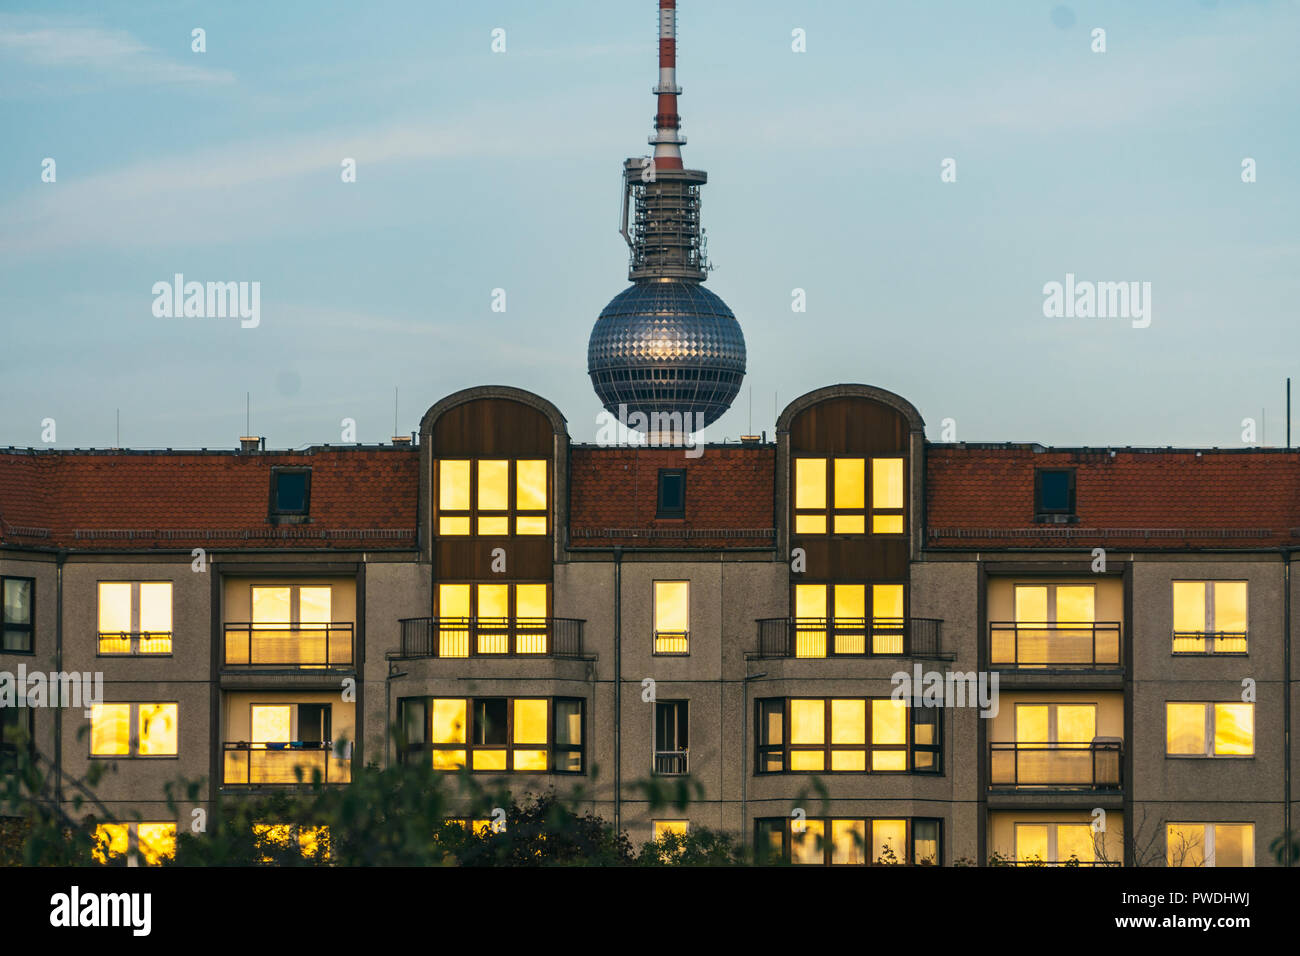 Berlin, Germany, October 08, 2018:  Tv Tower Behind Building with Sunset Reflections in Windows Stock Photo